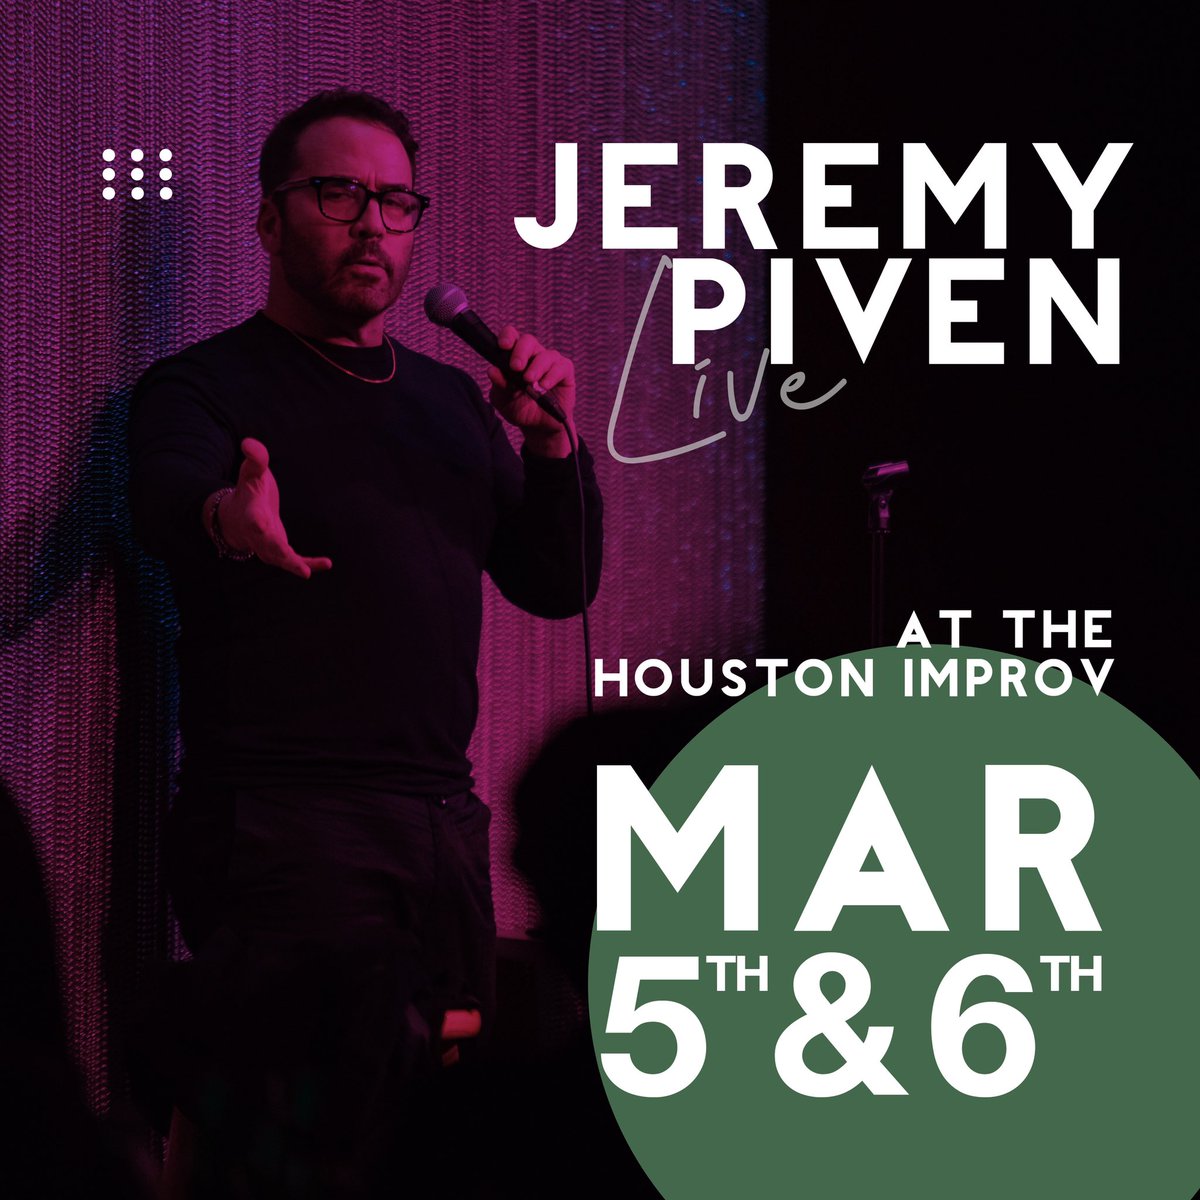 You guys up for a laugh this weekend  in Houston ?  @ImprovHouston  let’s get after it ! 